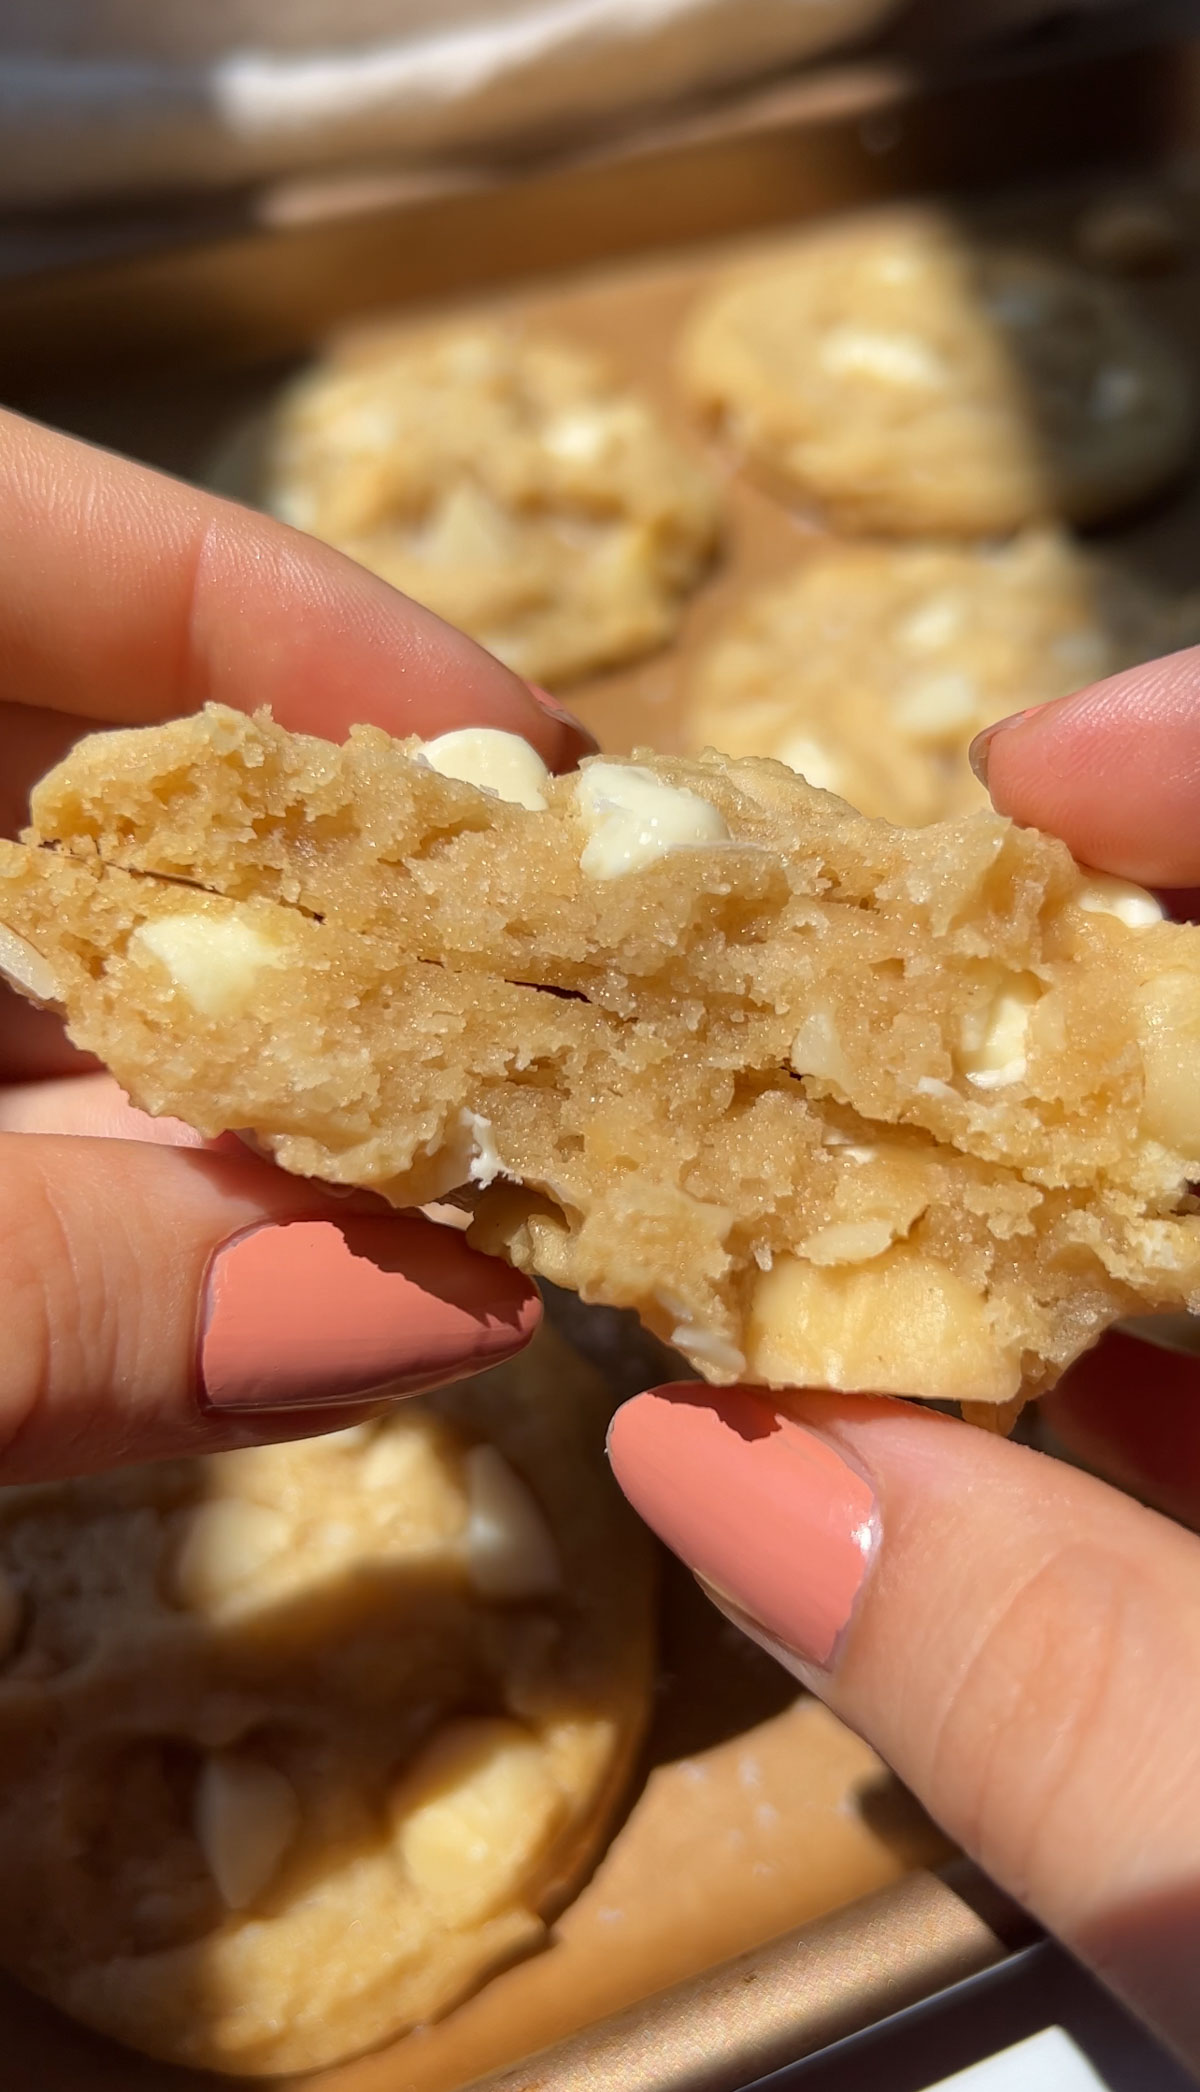 the inside texture of a white chocolate macadamia cookie